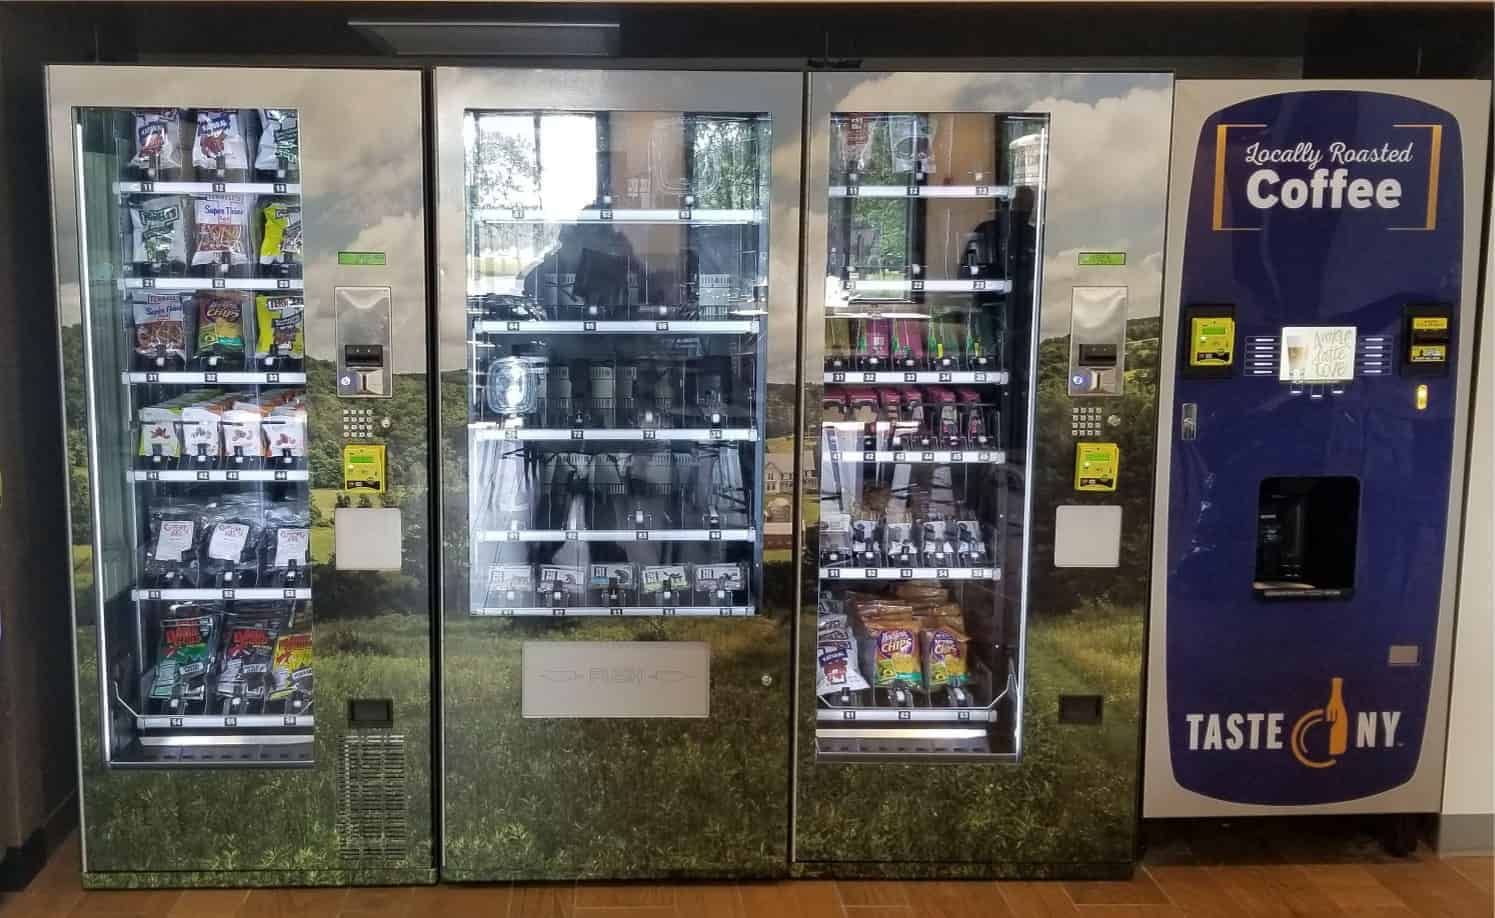 National Vending 181 Snack Machine - Vending Machines by Franklyn Services